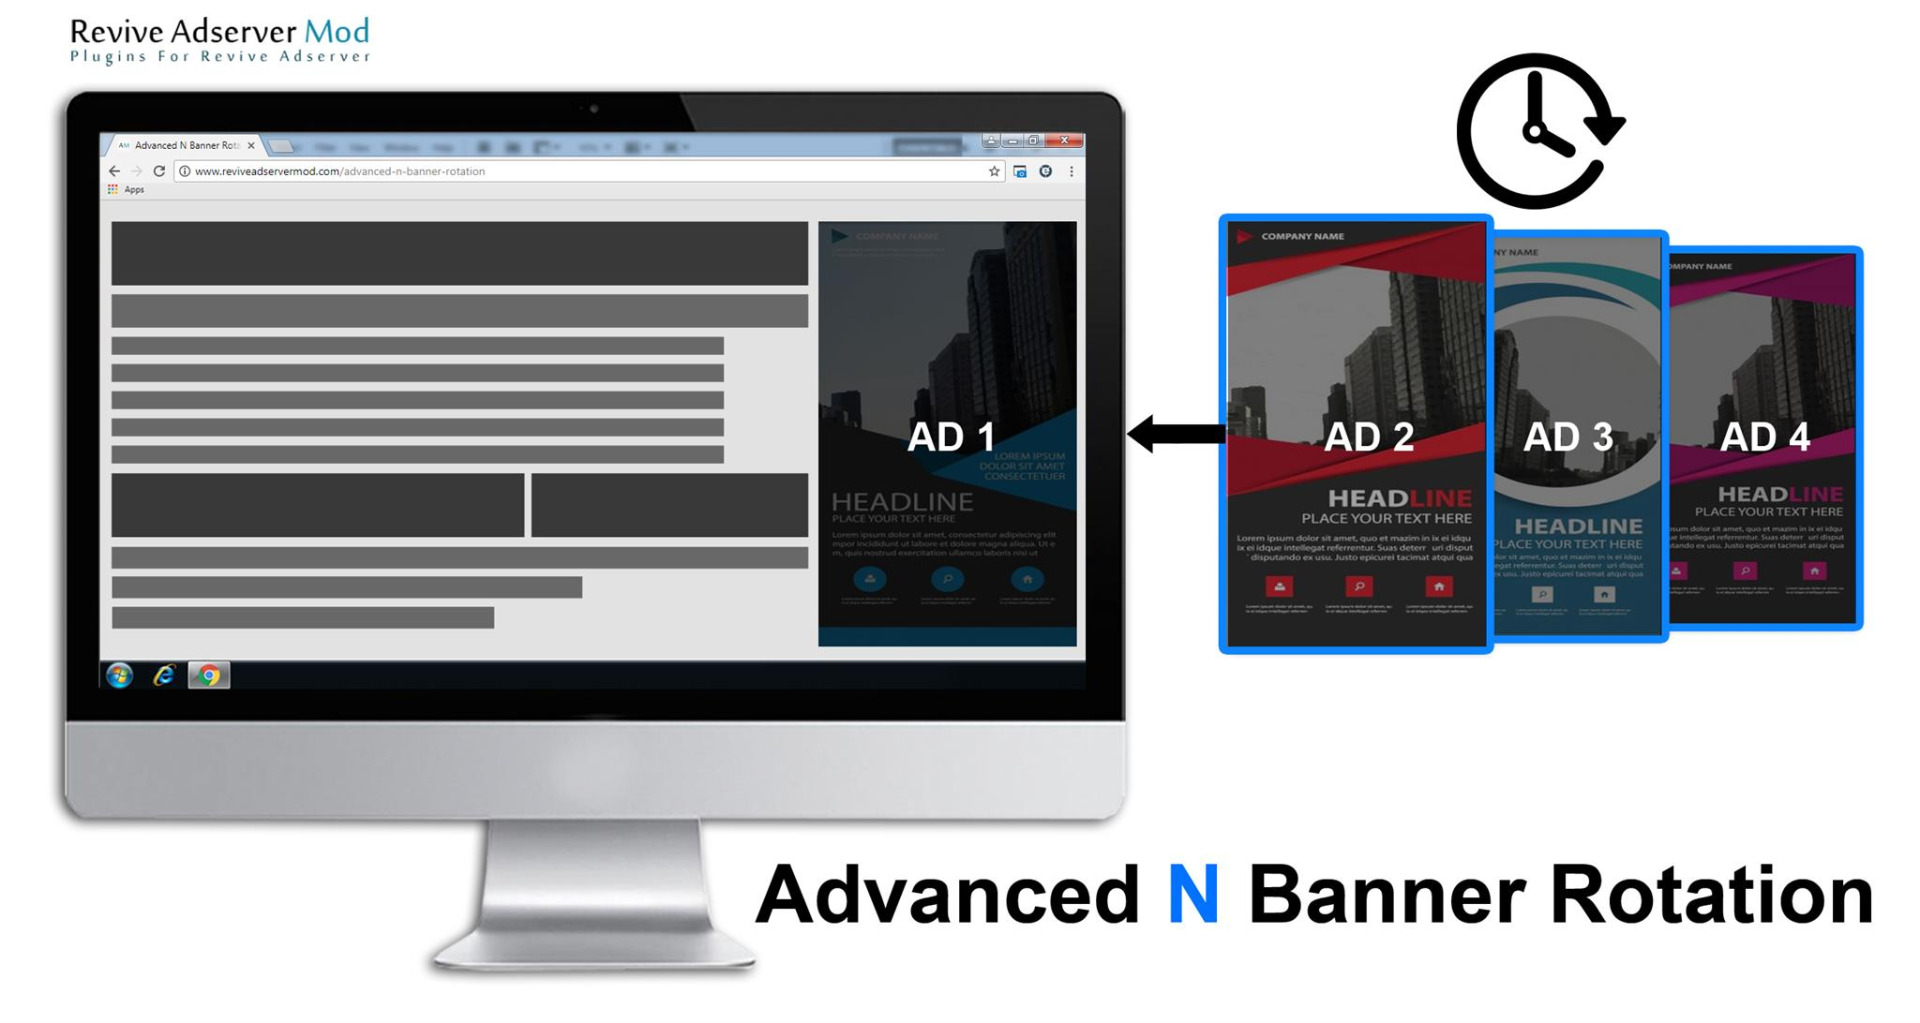 How to define Delivery Rules for a Banner in Revive Adserver